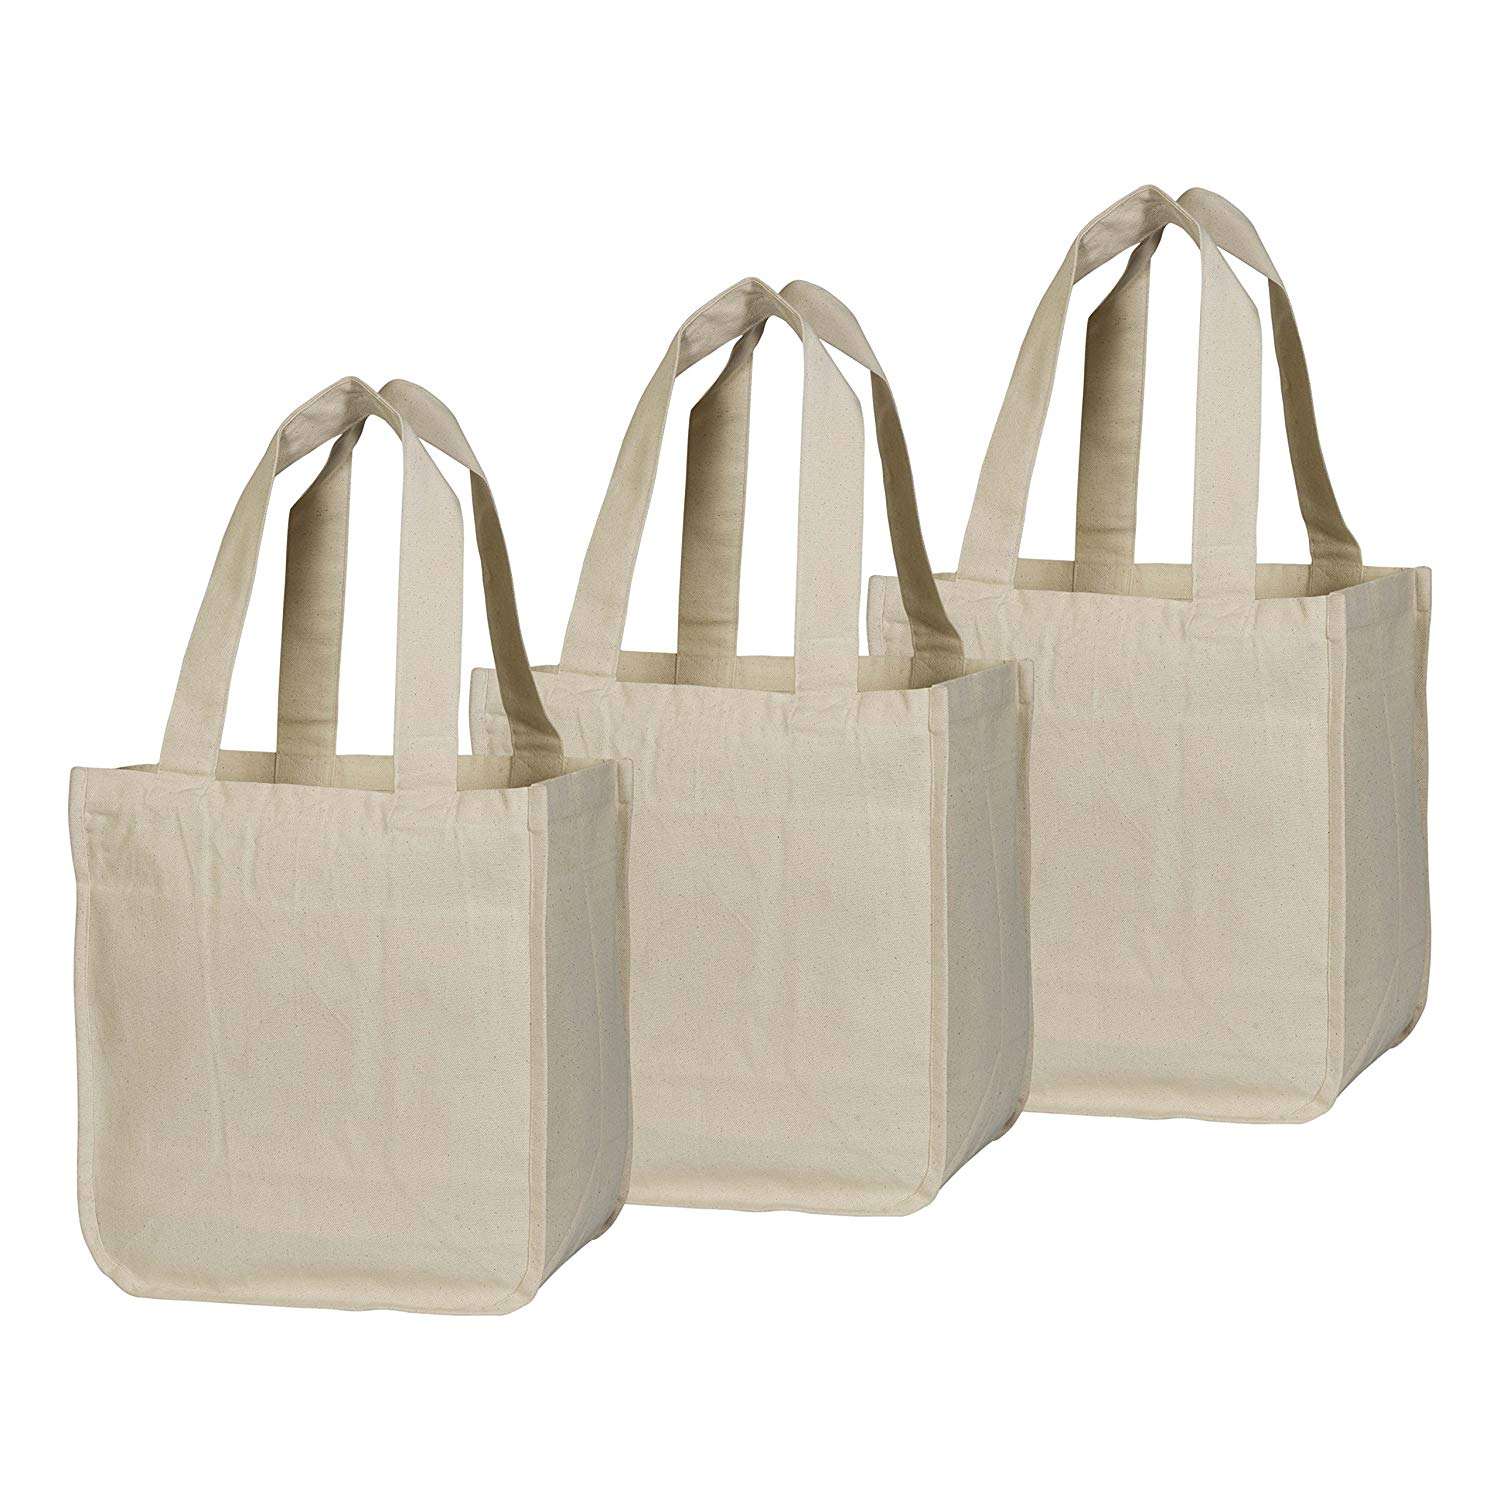 customized Canvas Grocery Shopping Bags Cloth Grocery Tote Bags Reusable Organic Cotton Washable Eco-friendly Bags